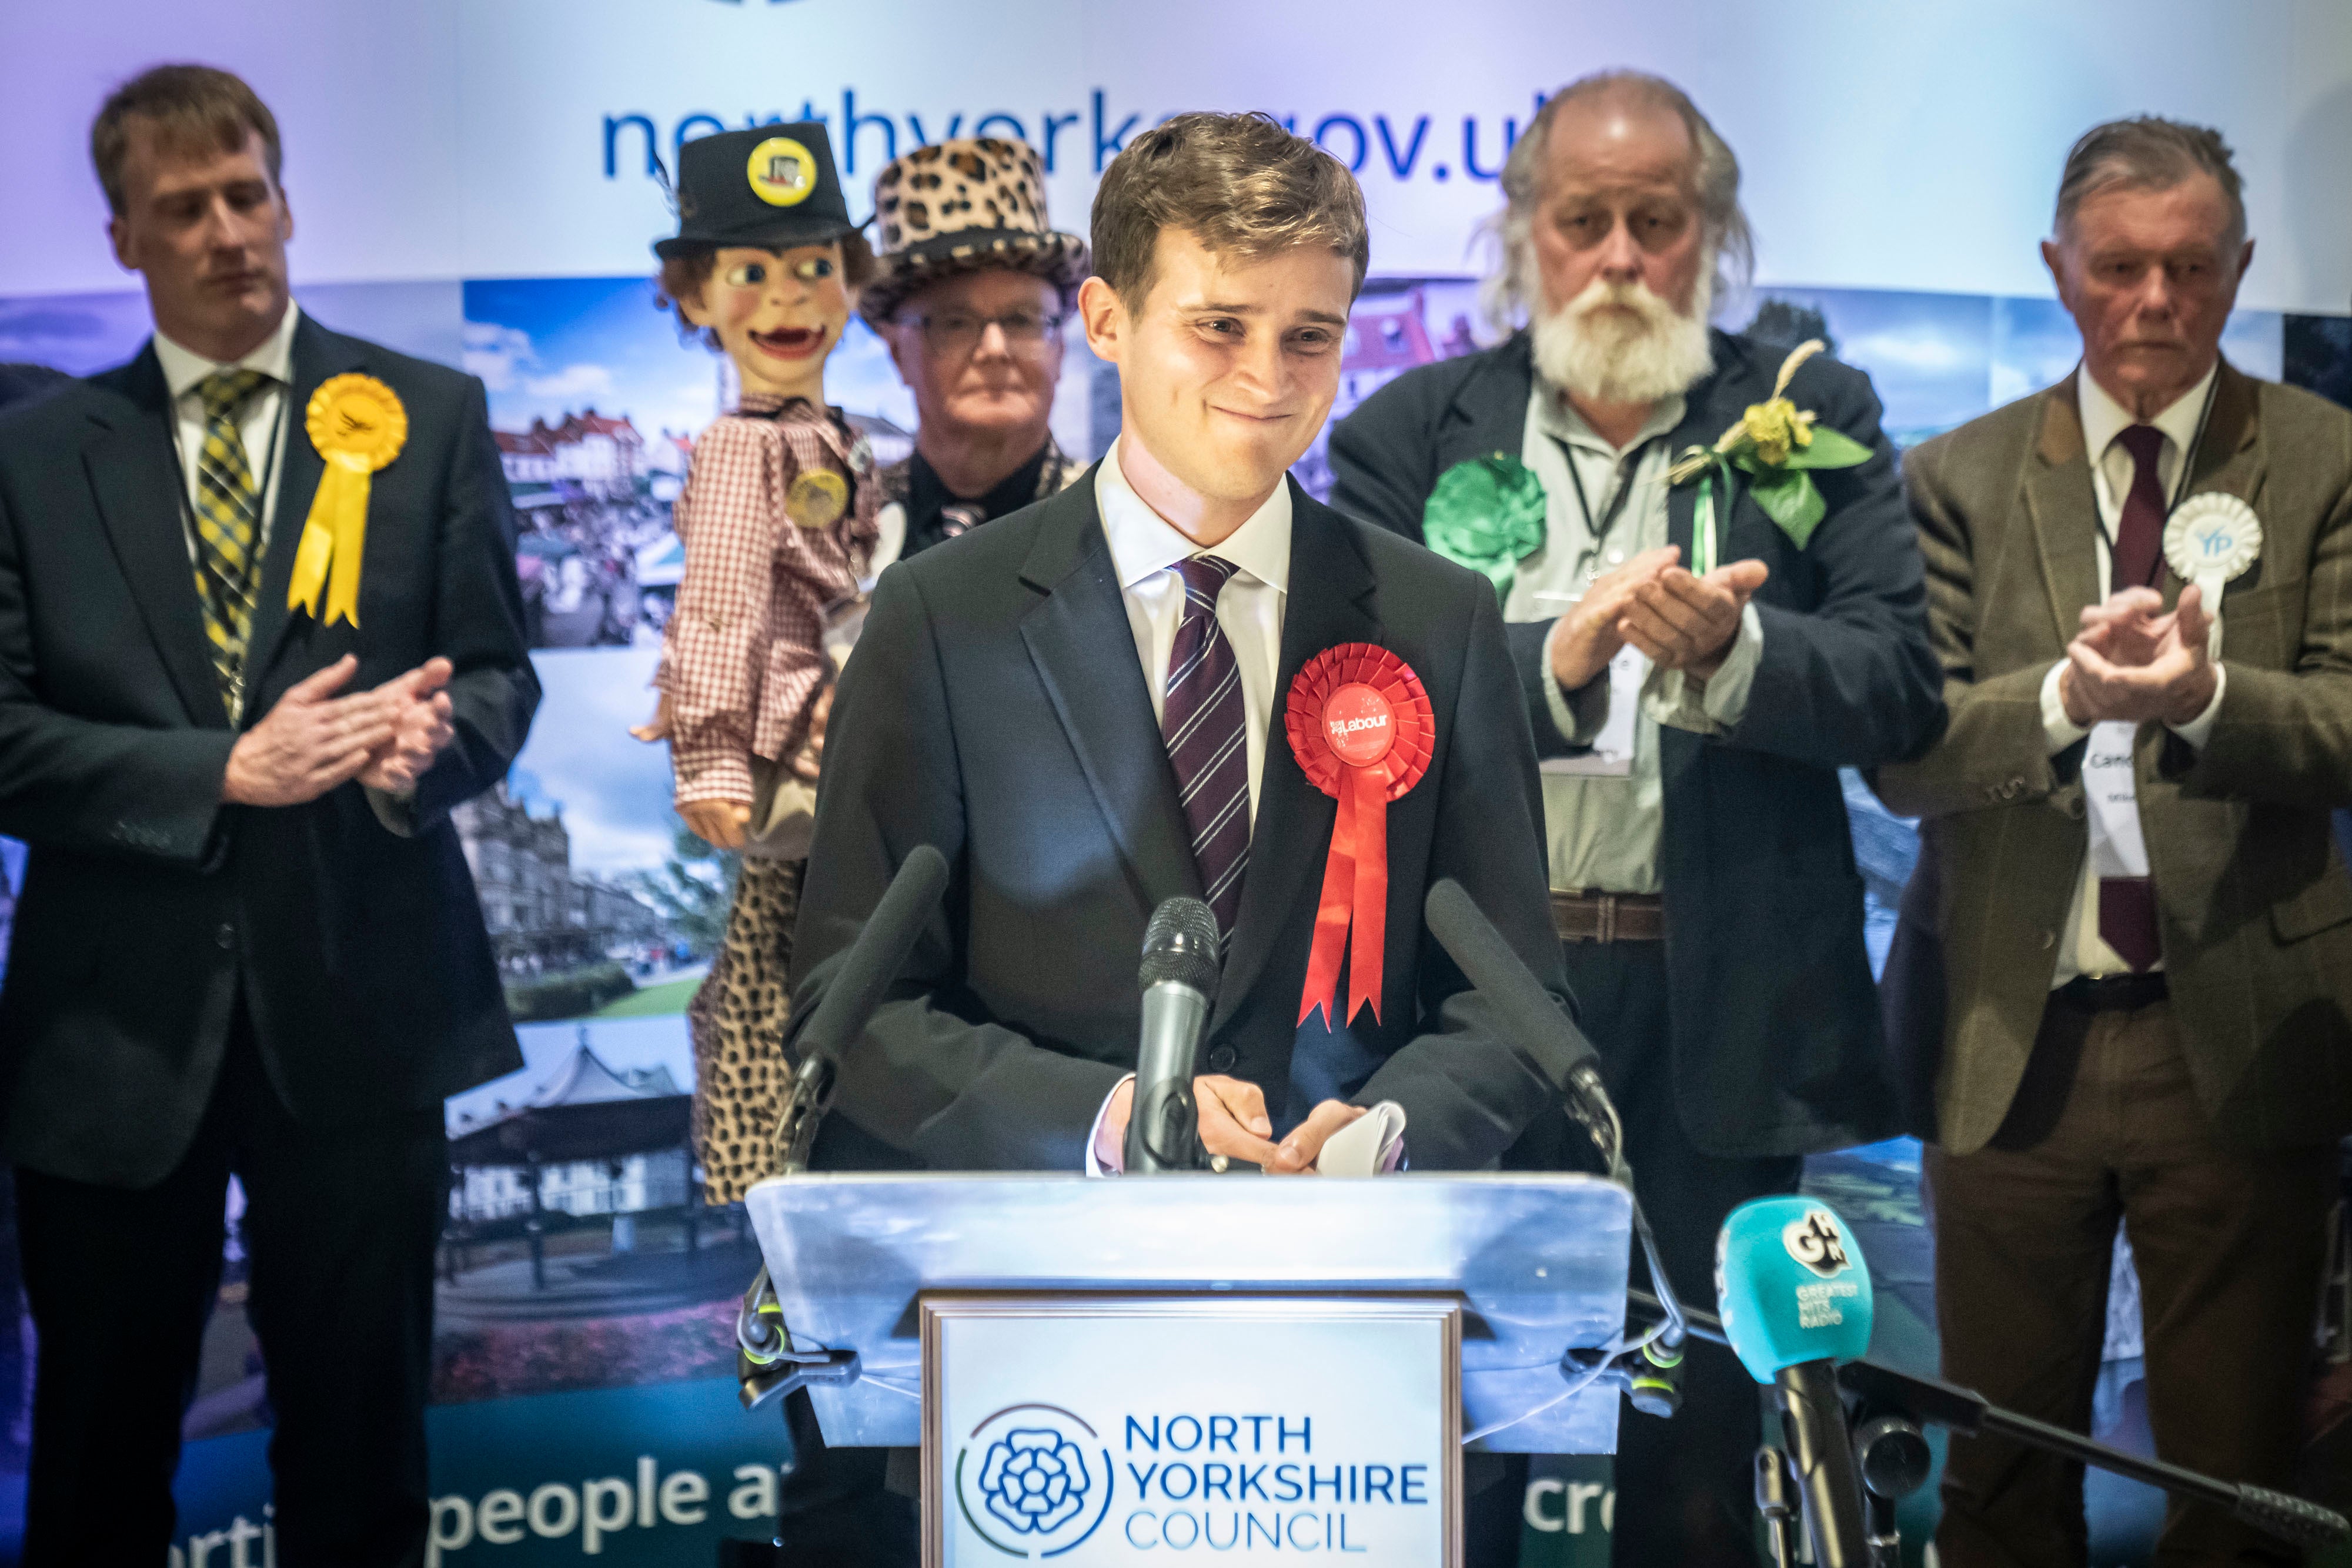 By-election winner Keir Mather speaks after the results were announced for Selby and Ainsty